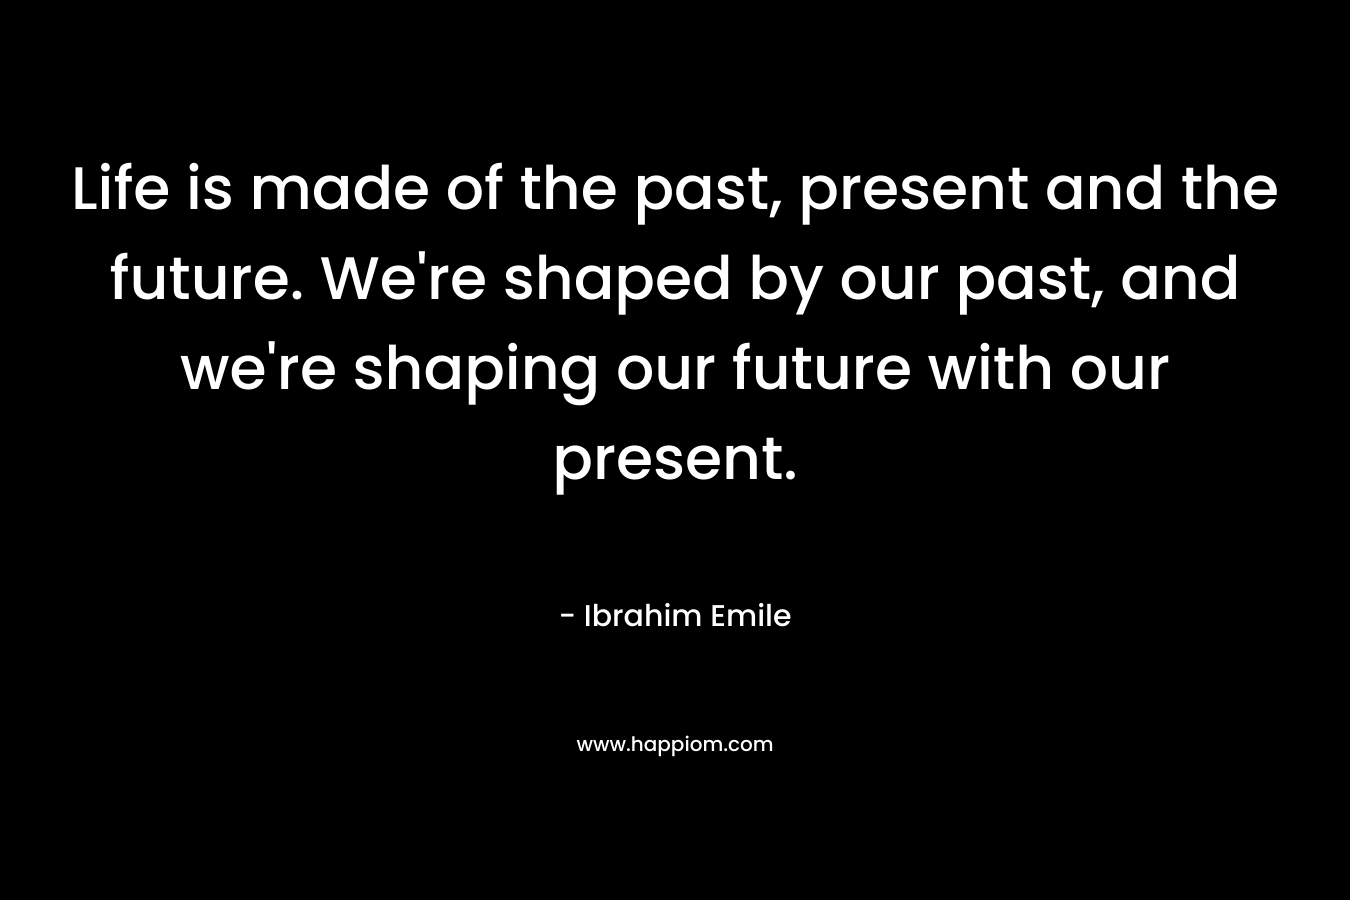 Life is made of the past, present and the future. We're shaped by our past, and we're shaping our future with our present.